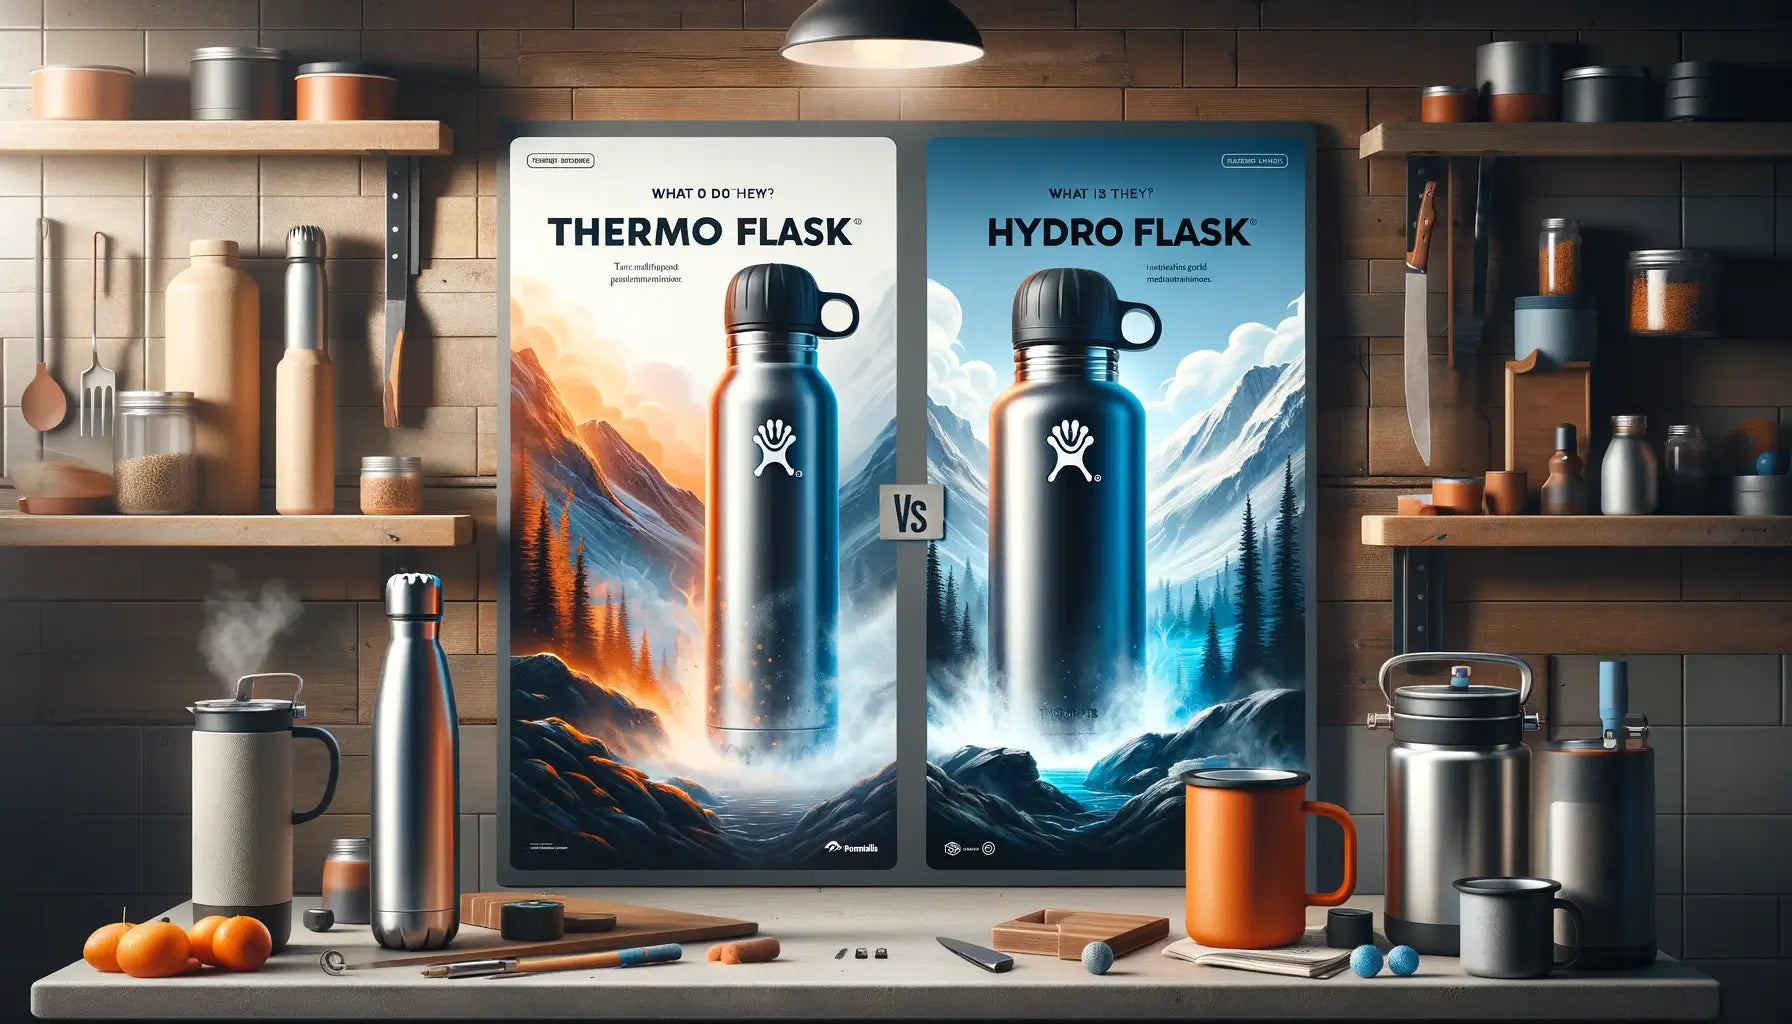 Is Hydro Flask the same as Thermoflask